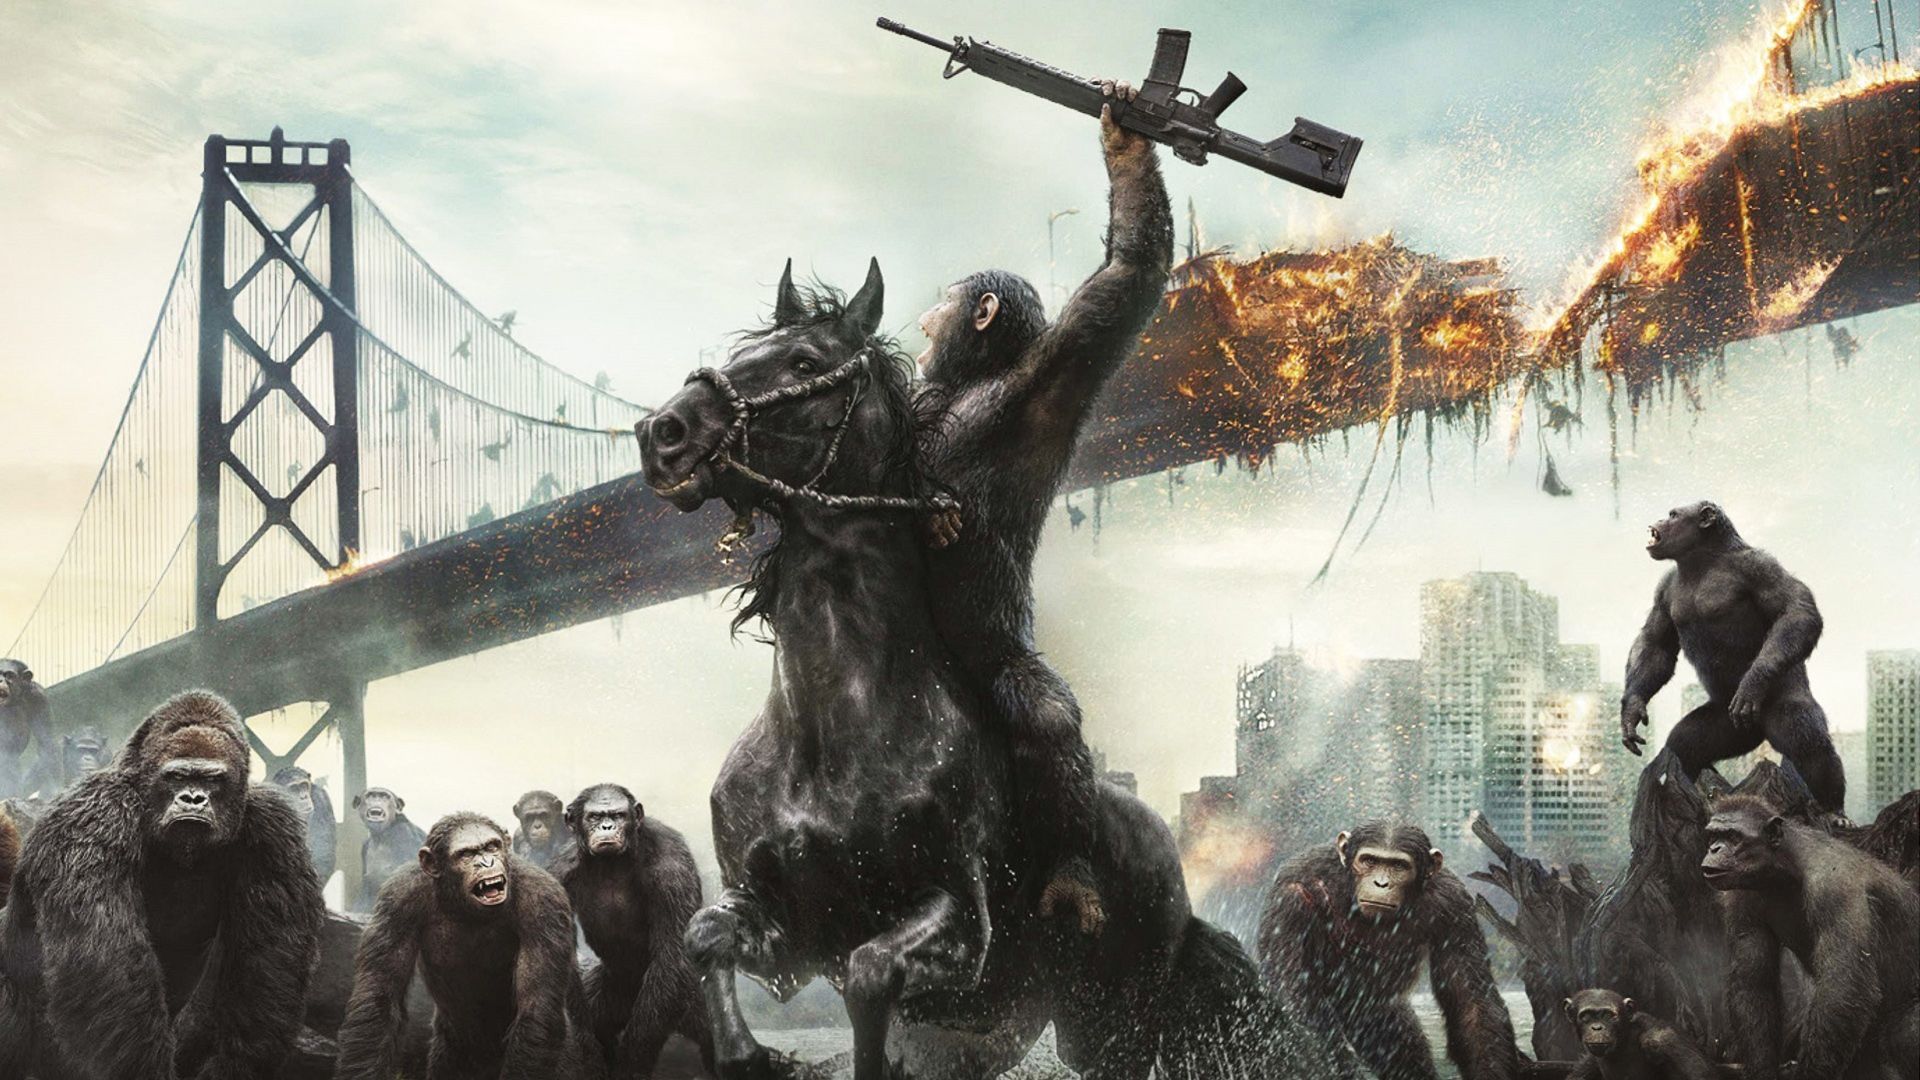 Dawn of the Planet of the Apes background